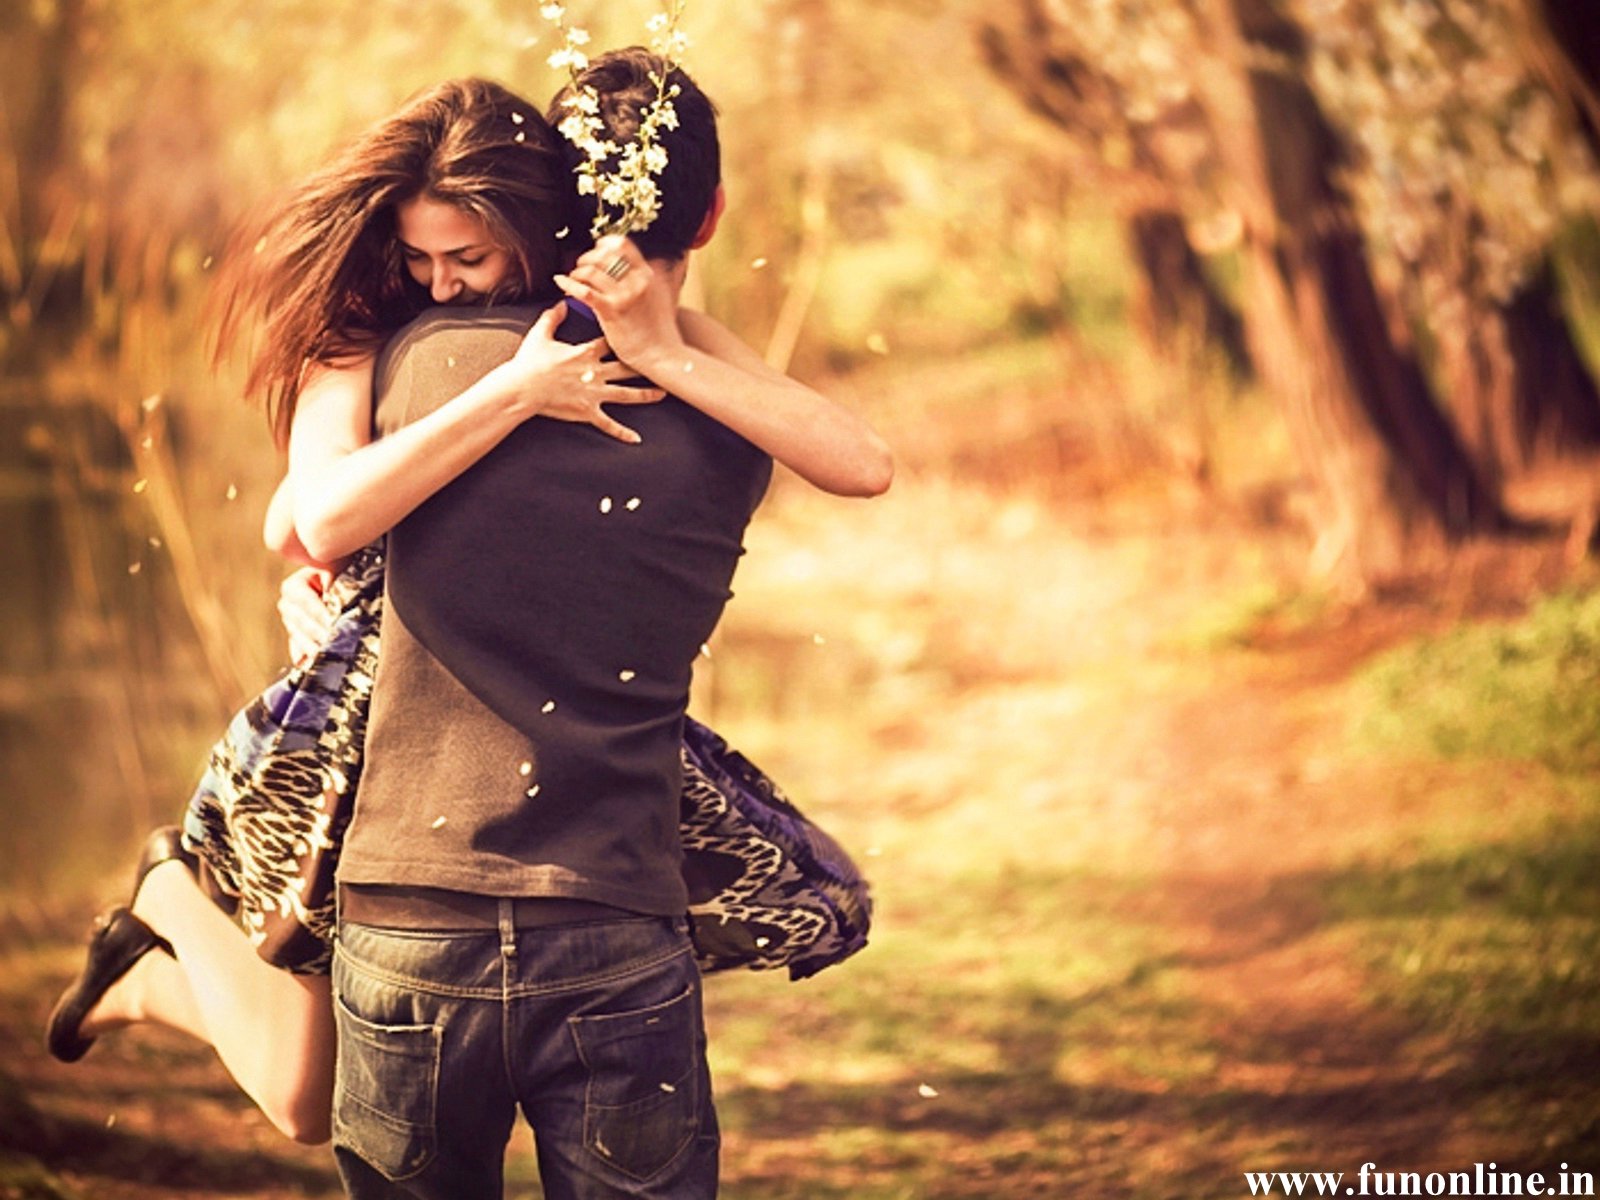 Couple Love Image 11 HD Wallpapers